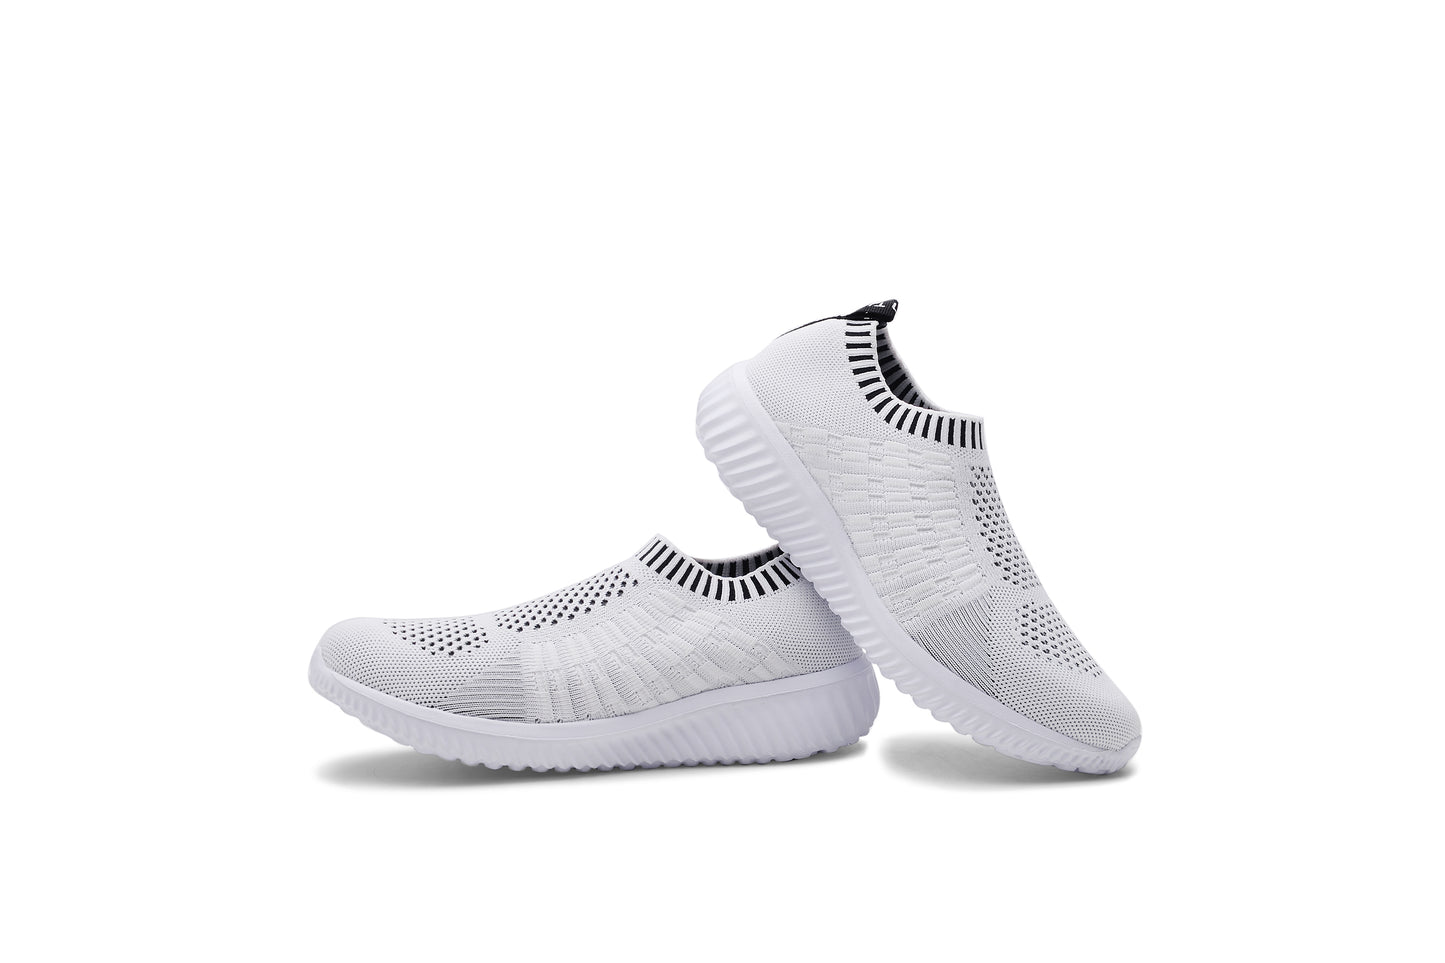 Knitted Slip-On Walking Shoes Sizes 10-13: 6701